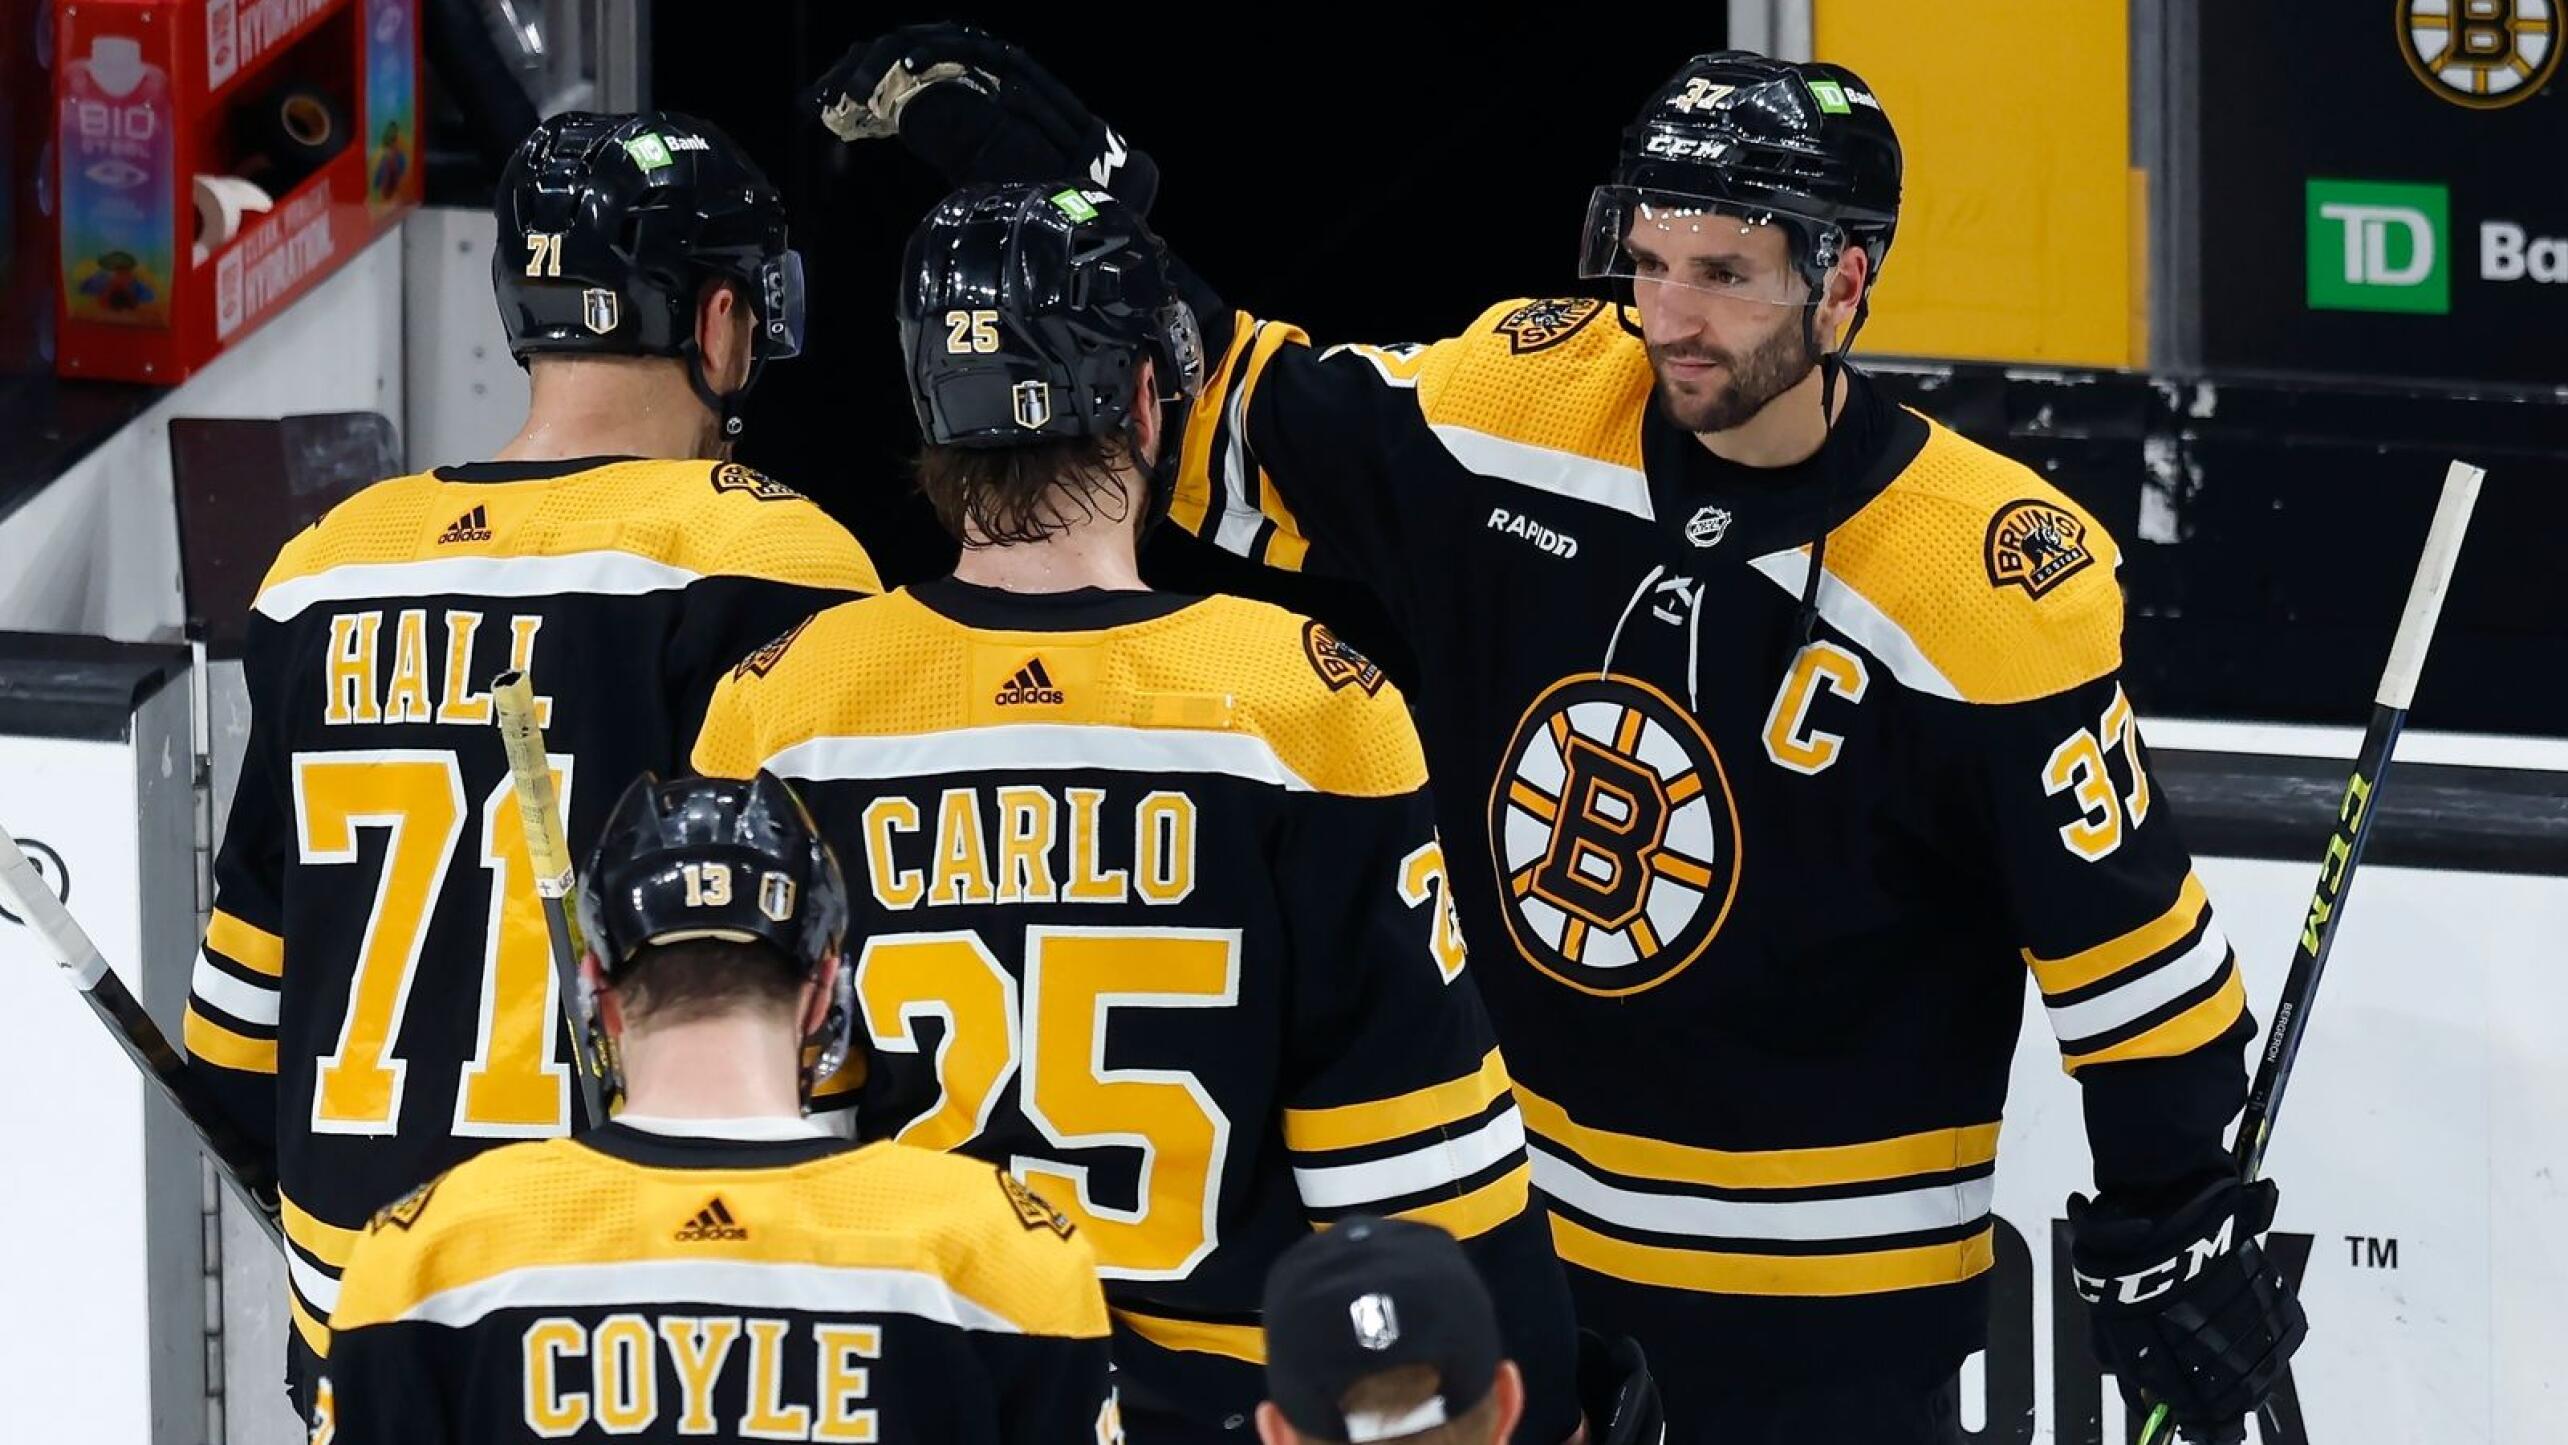 Here's when the NHL Stanley Cup Final for the Boston Bruins will begin